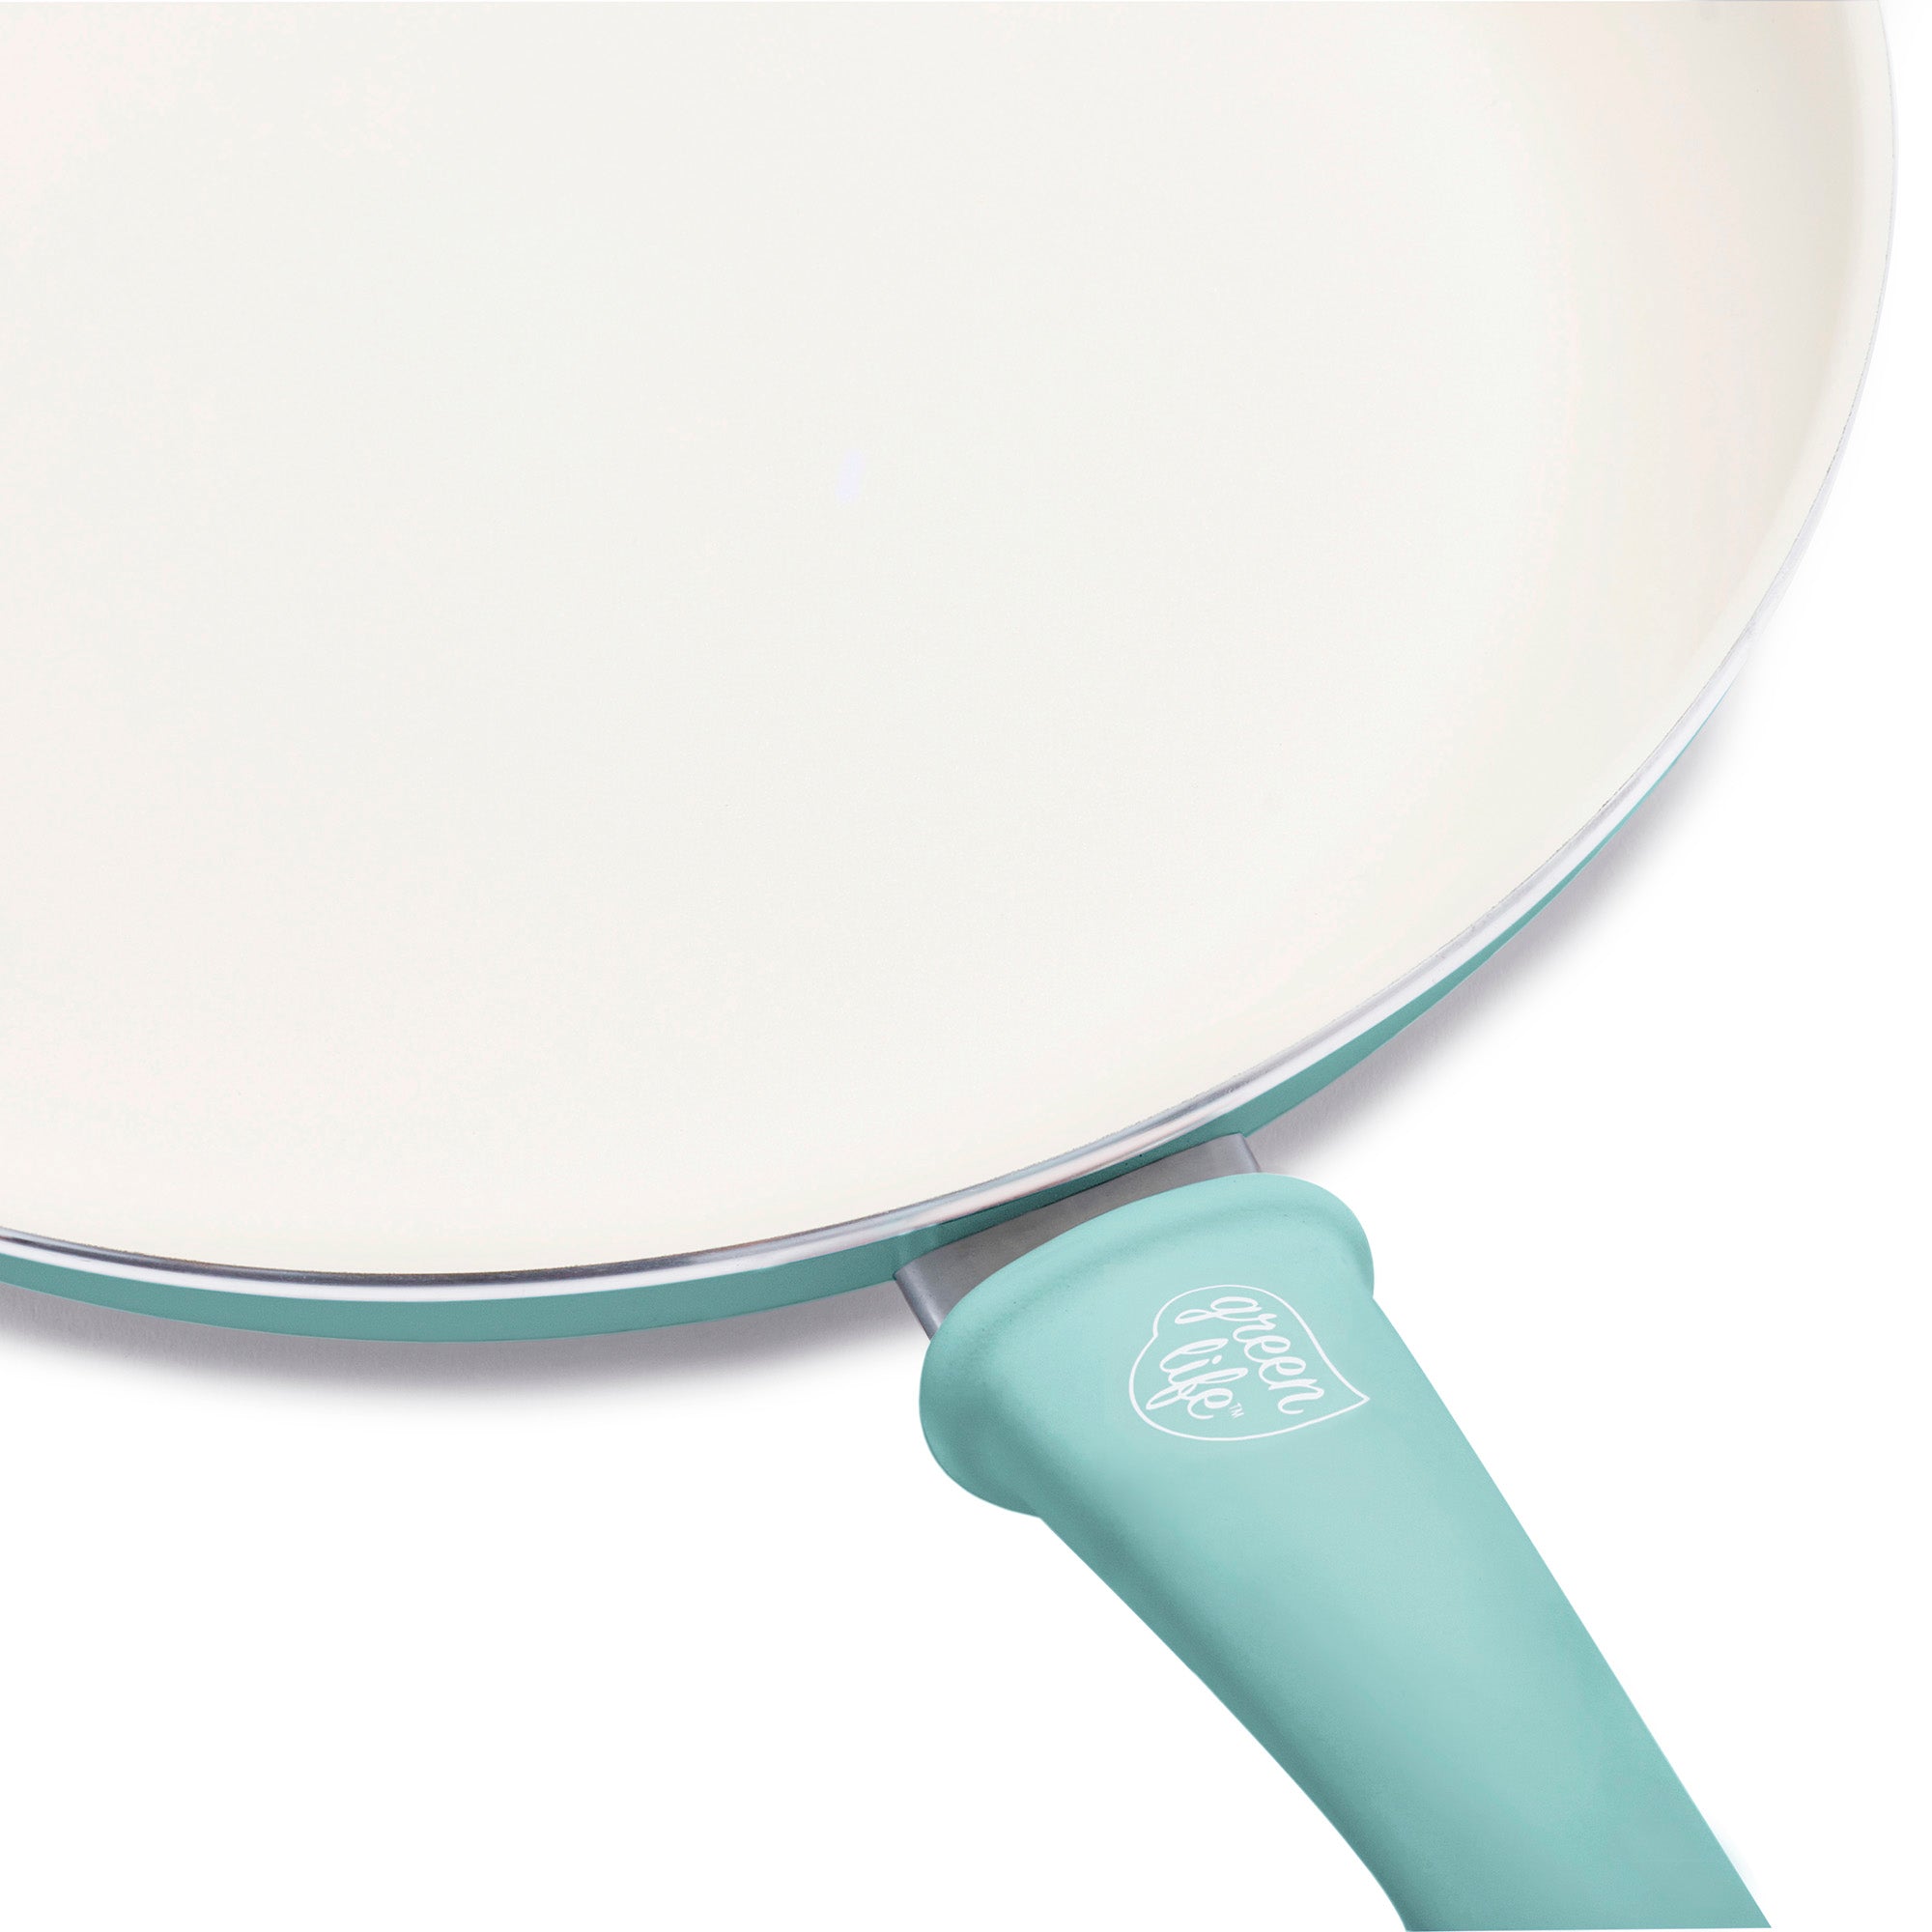 GreenLife  Soft Grip 8-Inch Frypan